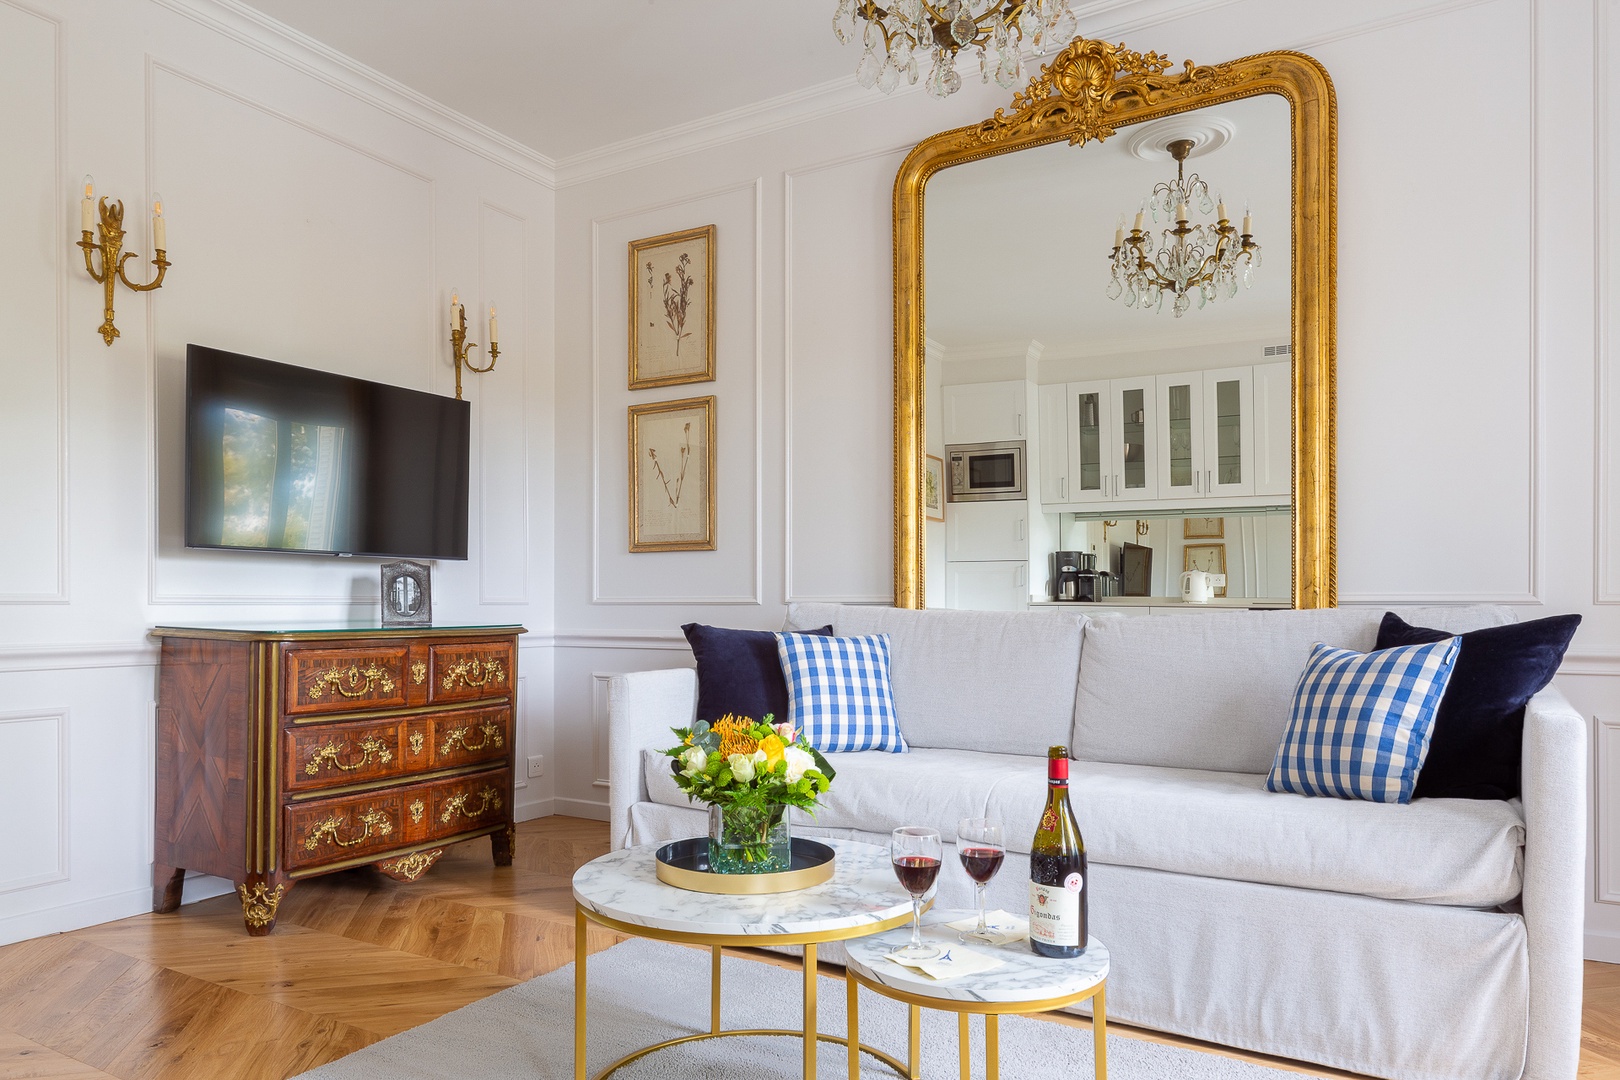 Welcome to the charming Saint Julien apartment!